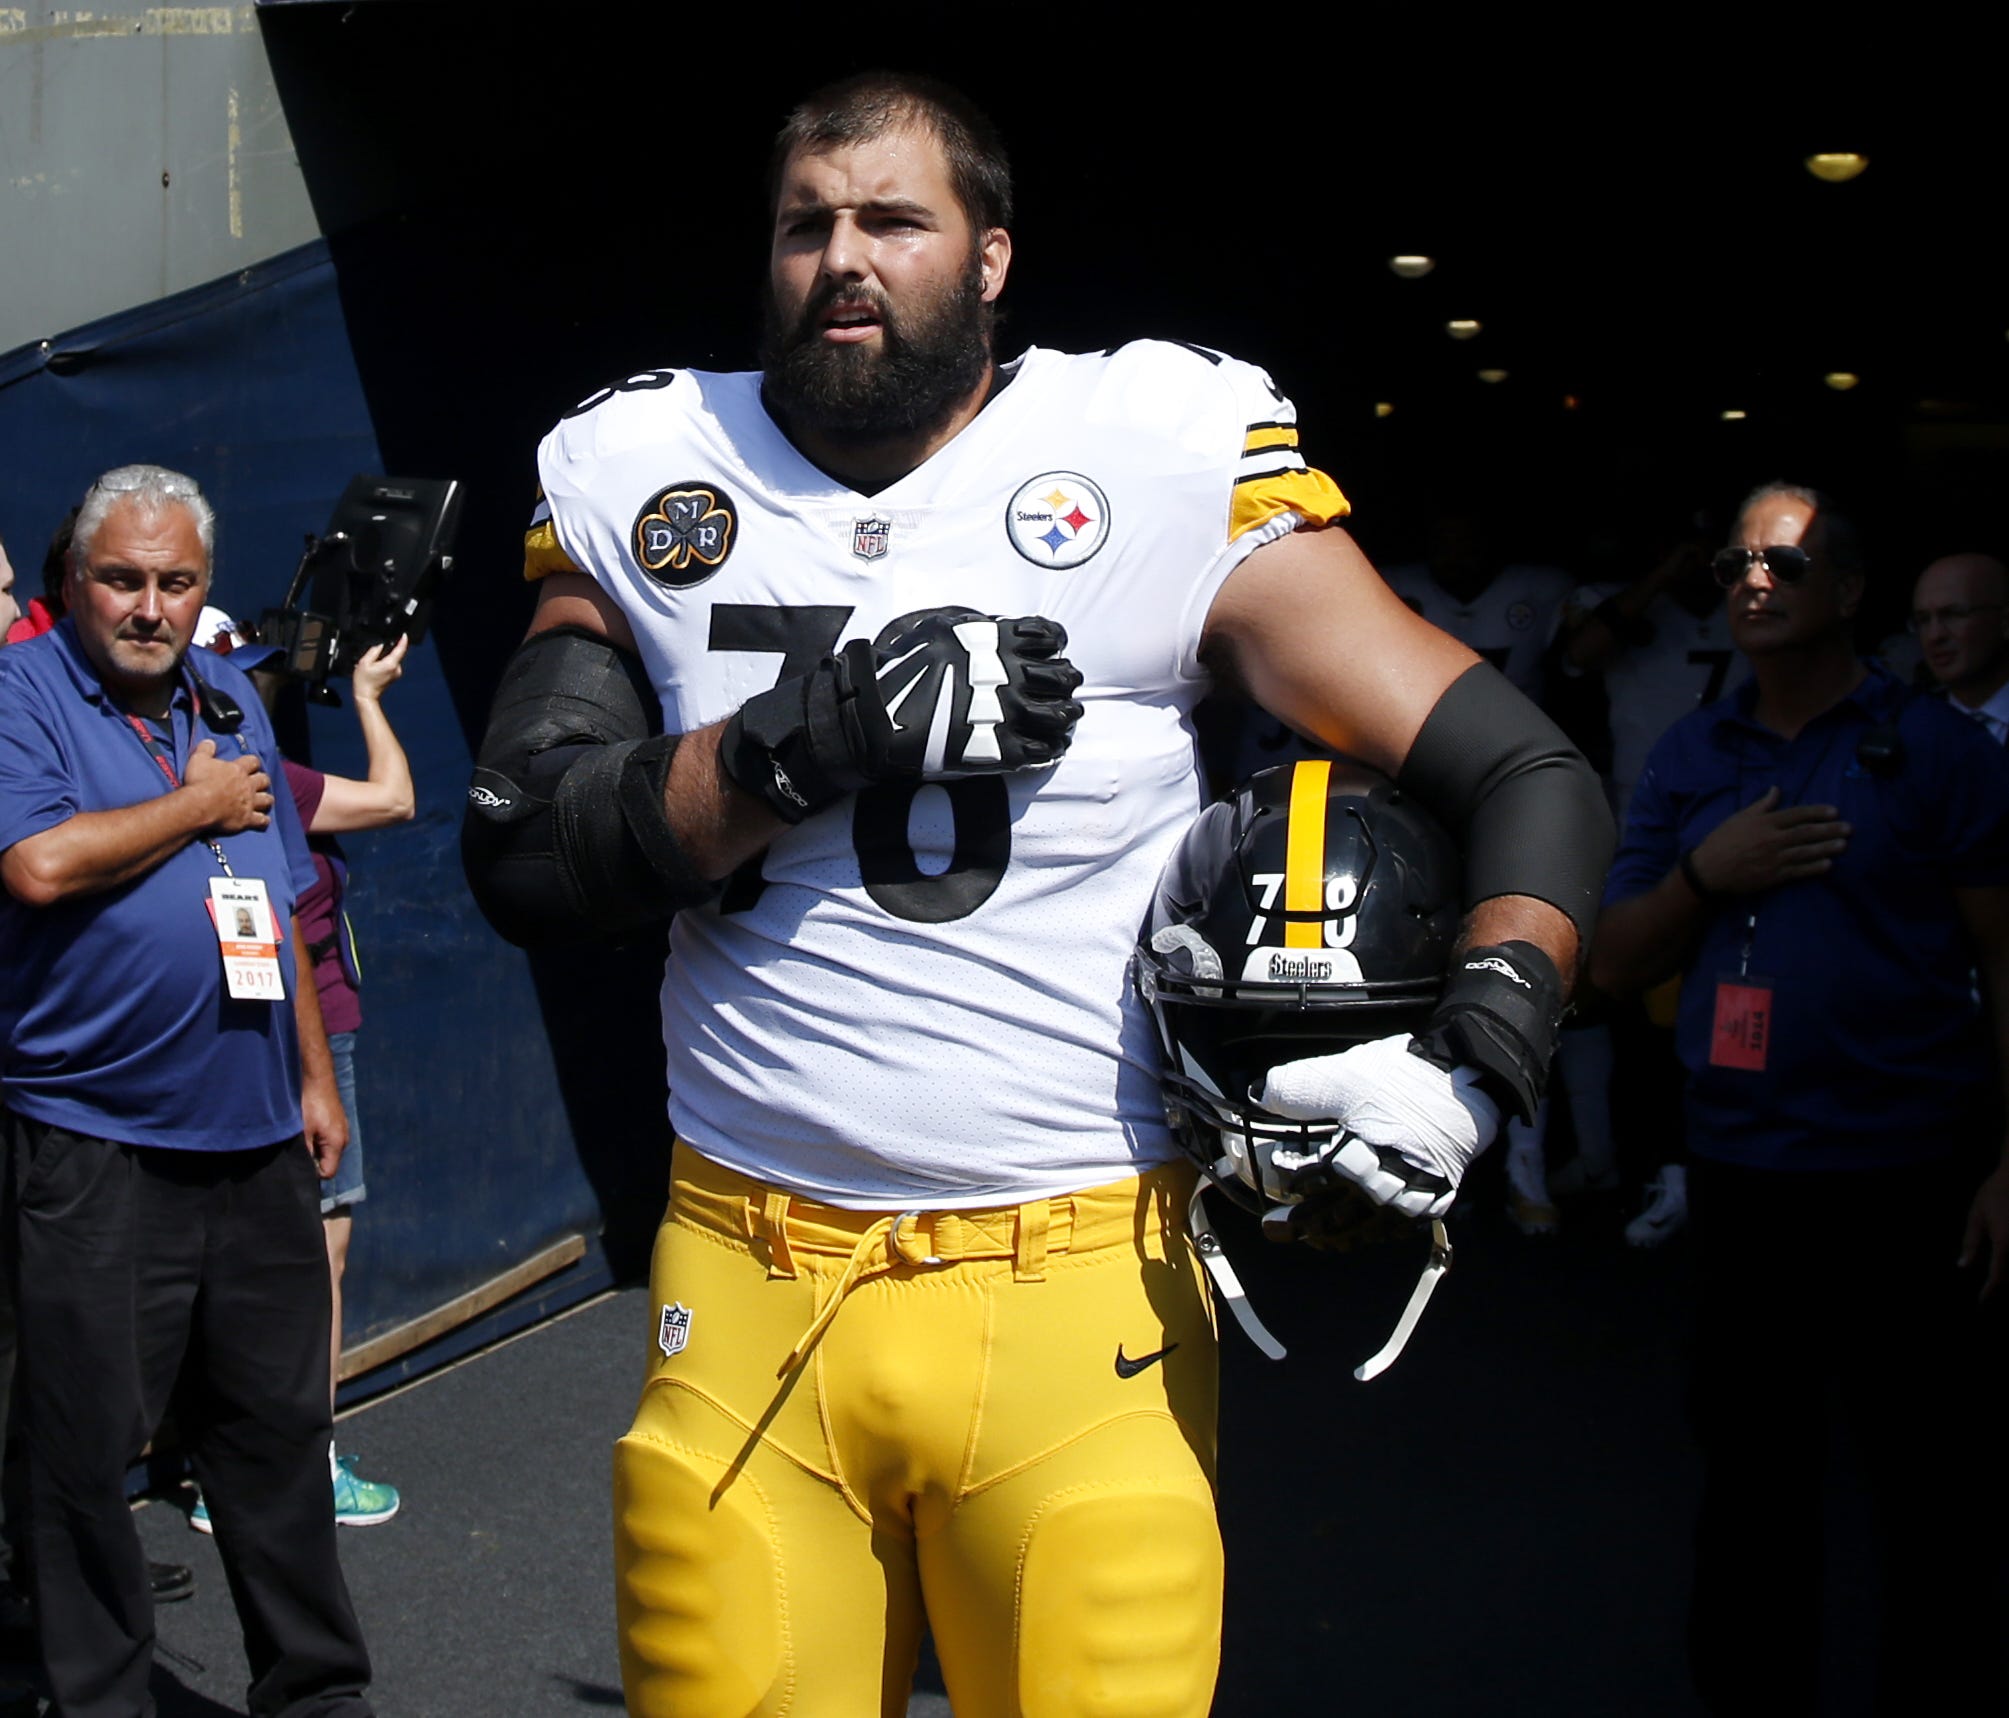 Alejandro Villanueva of the Pittsburgh Steelers stands by himself in the tunnel for the national anthem prior to the game against the Chicago Bears at Soldier Field on September 24, 2017 in Chicago, Illinois.